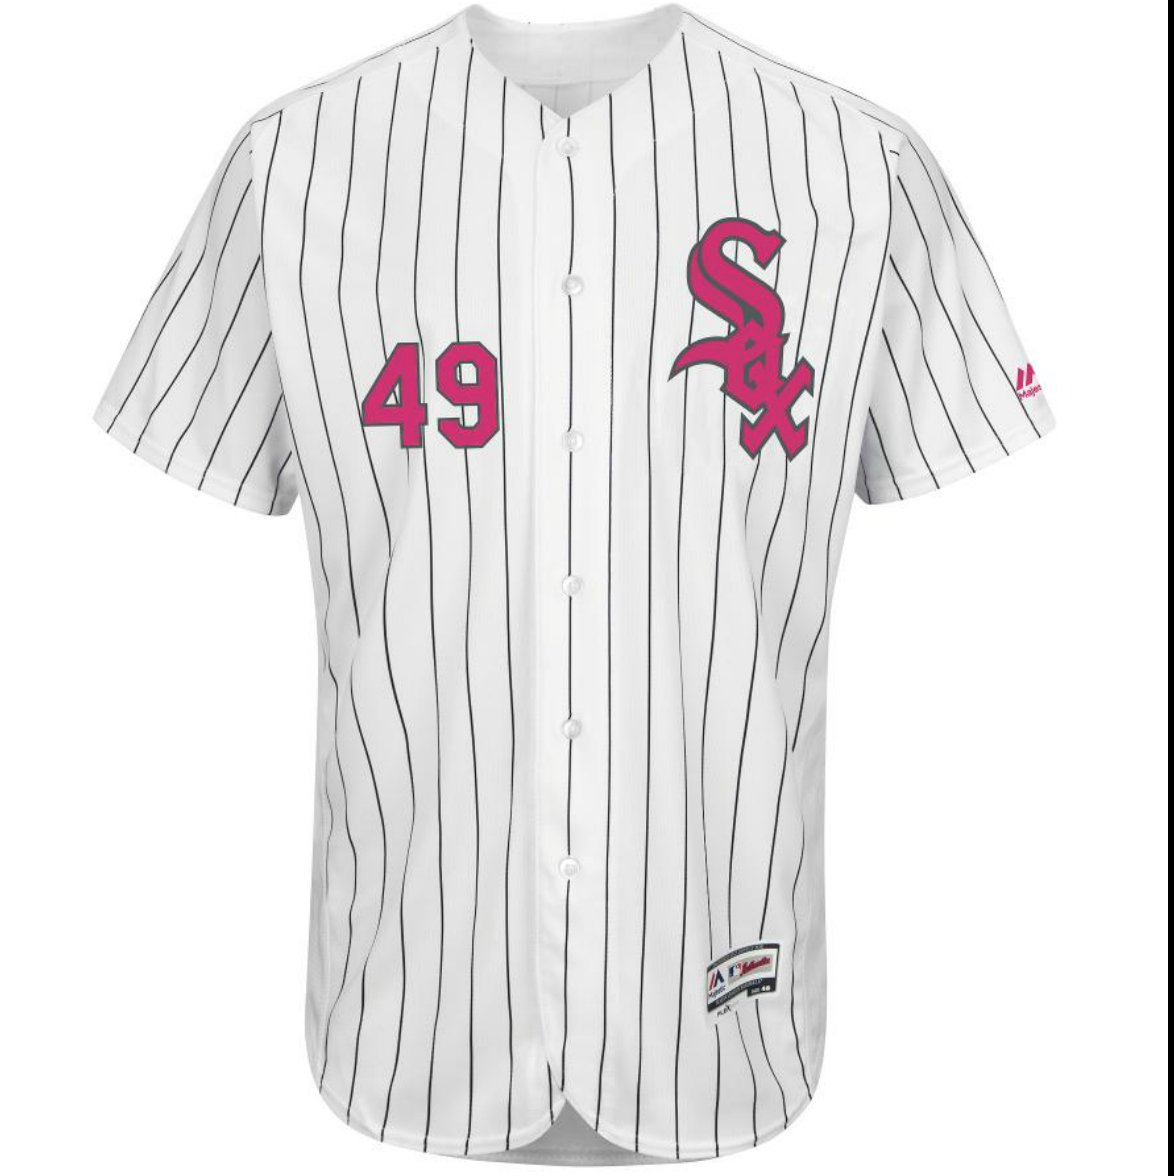 chicago white sox 1972 jersey